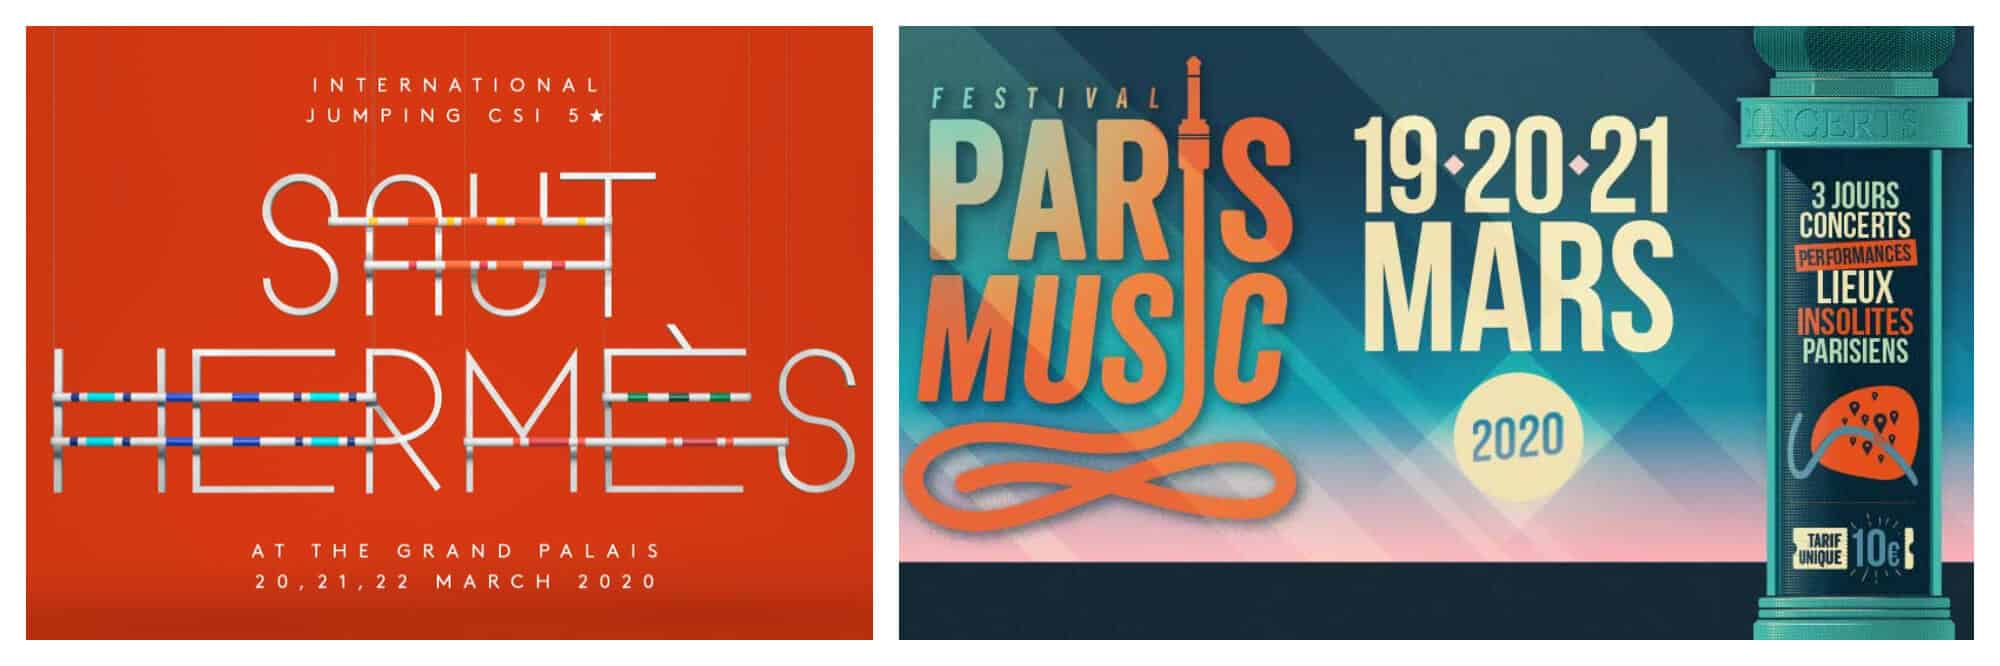 Banner for Saut Hermès hirse jumping event (left) and a poster of Paris music festival this March (right).